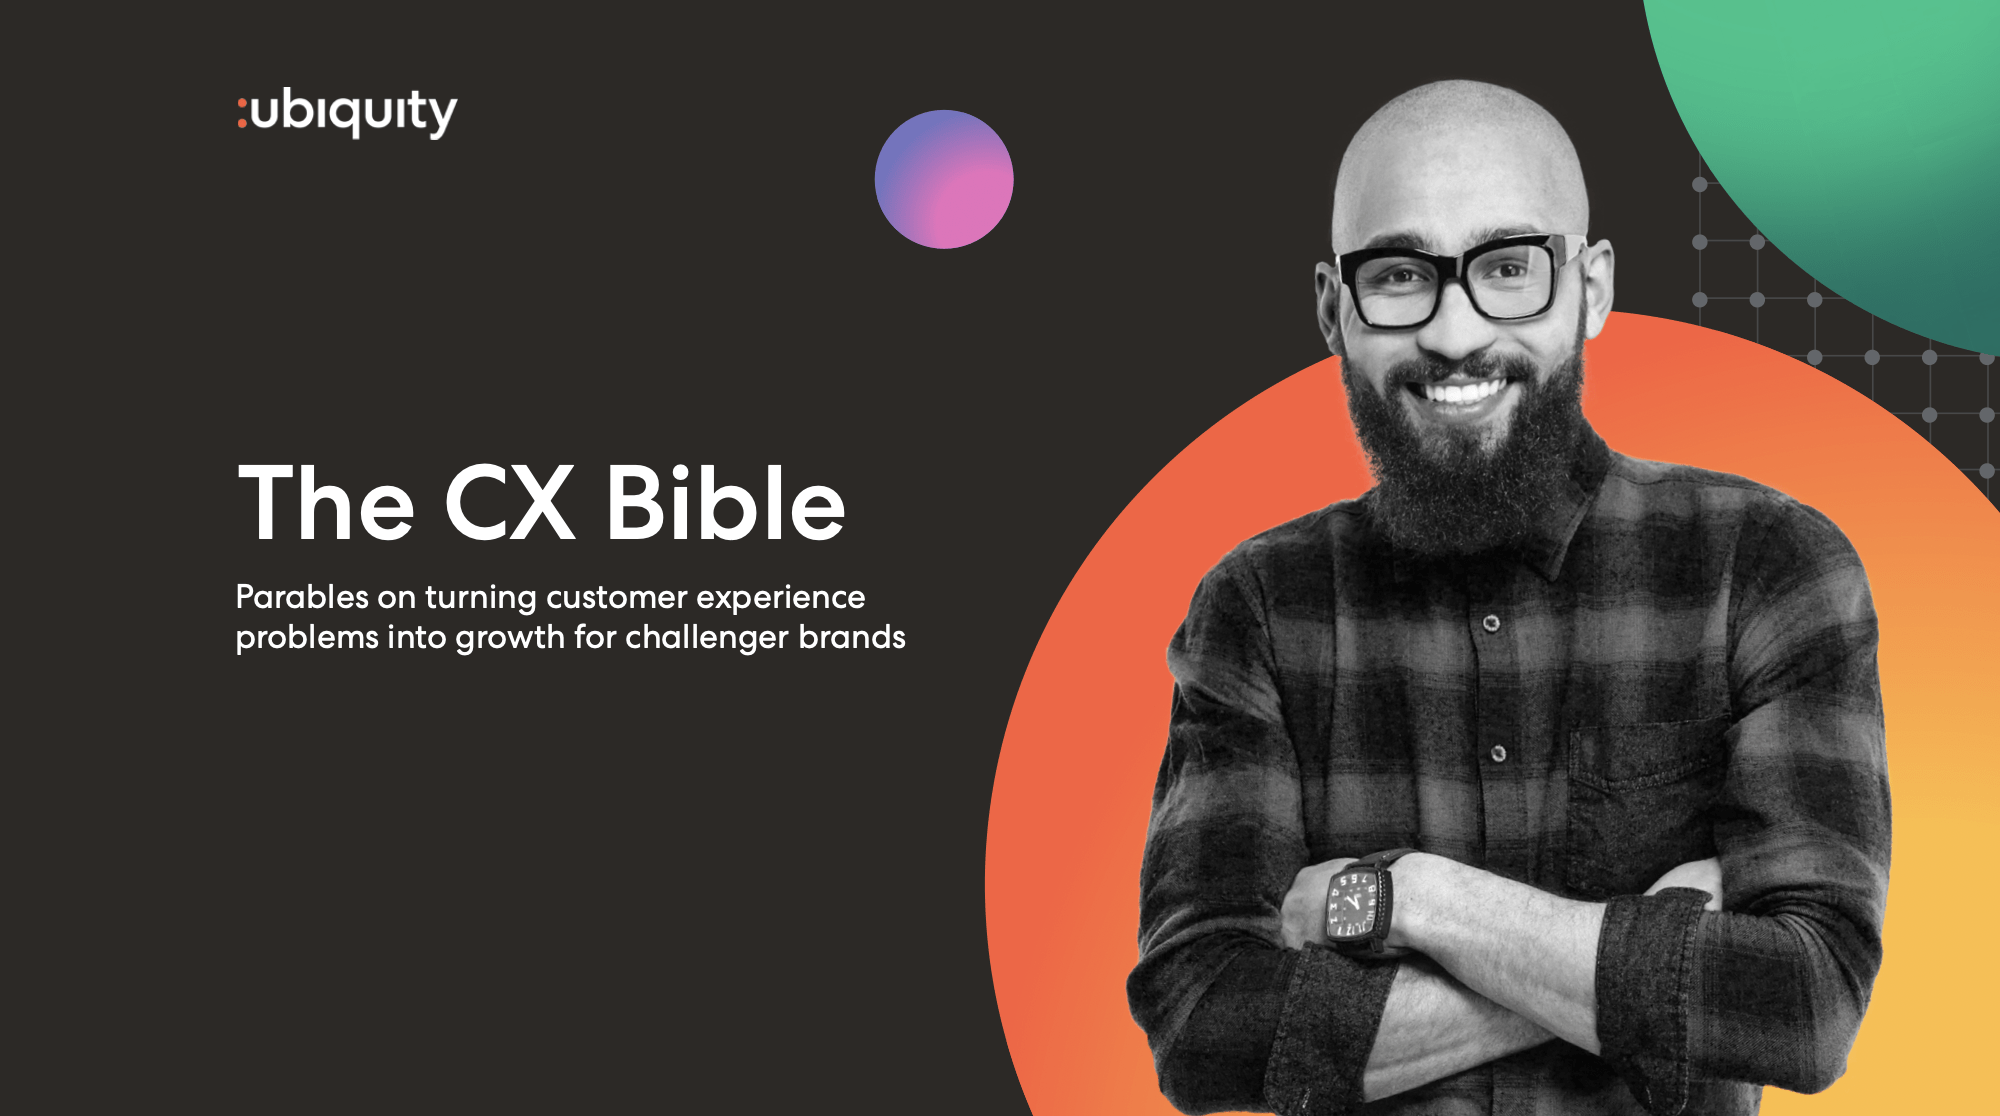 cxbible cover - Discover everything you don't know about CX from our experts